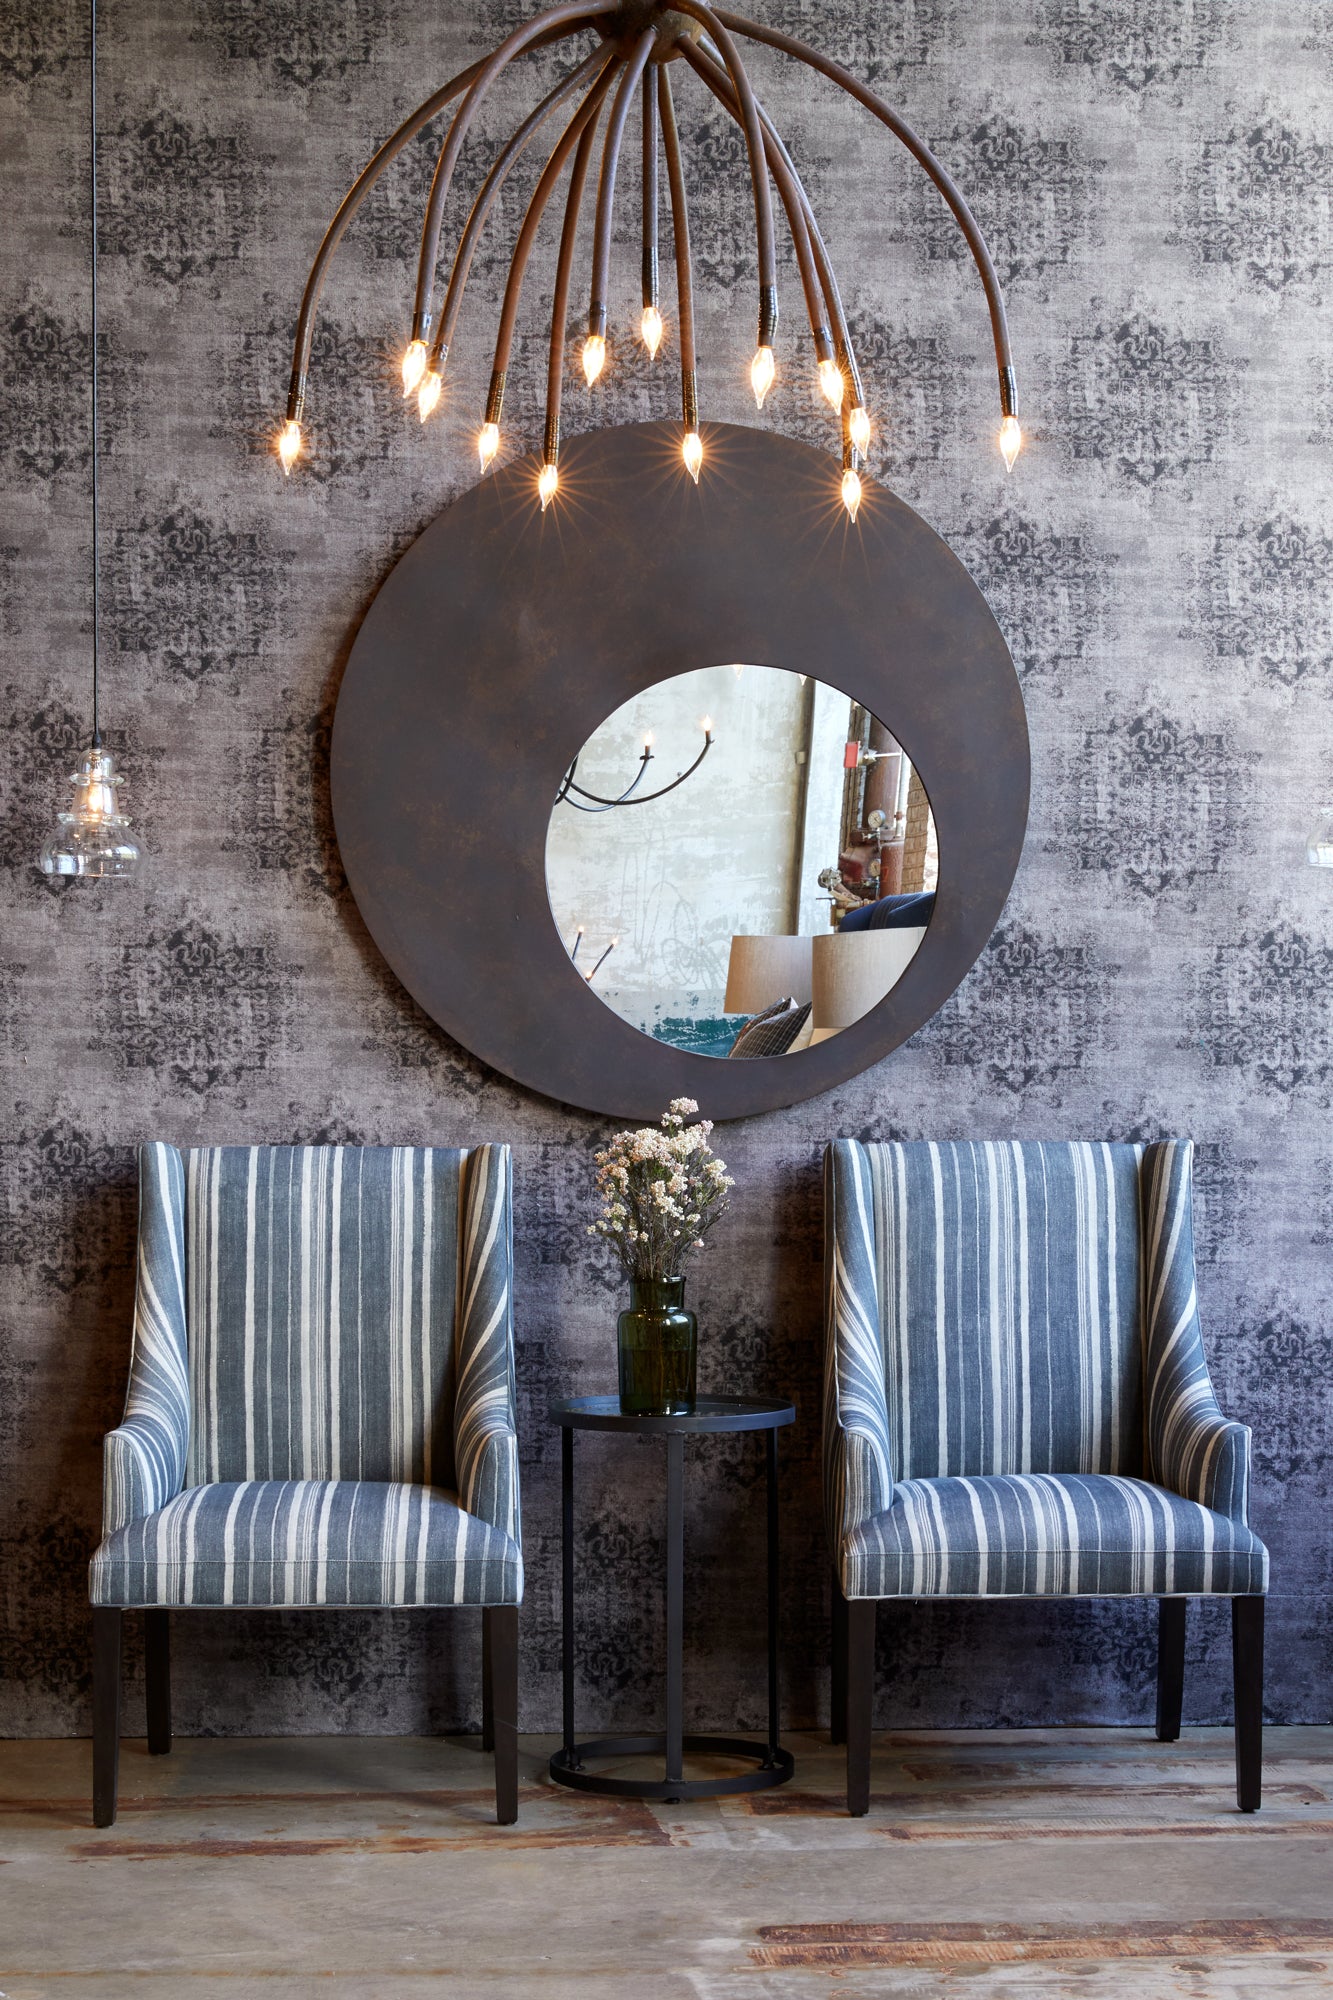  Blossom chandelier in black finish hanging above two upholstered chairs in striped blue fabric with round metal side table placed in front of upholstered wall in a grey/purple printed fabric and a round metal wall mirror.  